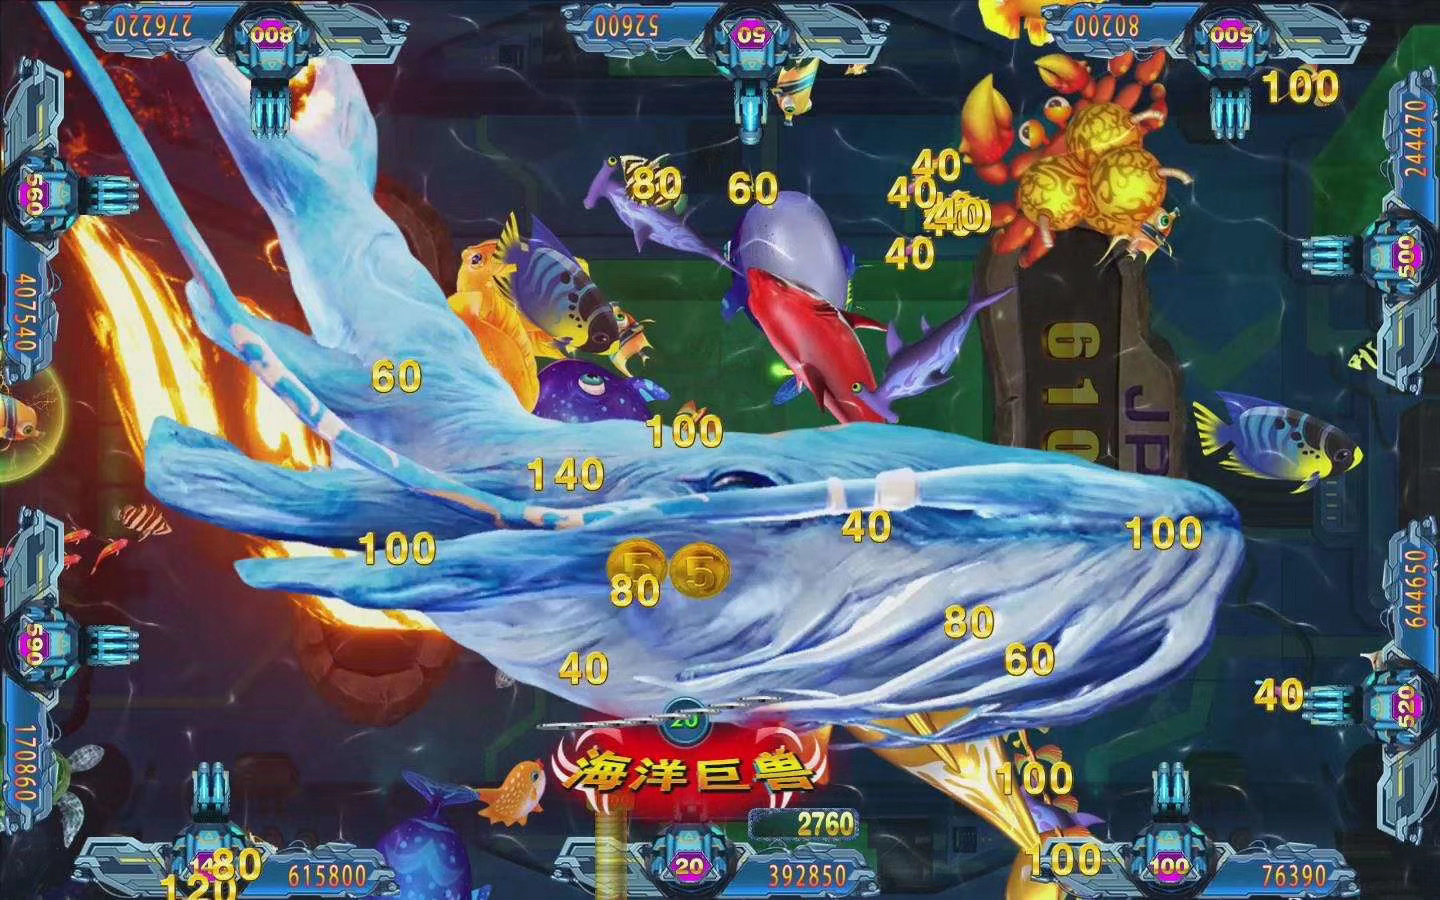 Fish Table Arcade Game Aline Super Jackpot Ultra Monster Online Game Board Kits Fish Table Arcade Game Aline Super Jackpot Ultra Monster Online Game Board Kits fish table arcade game